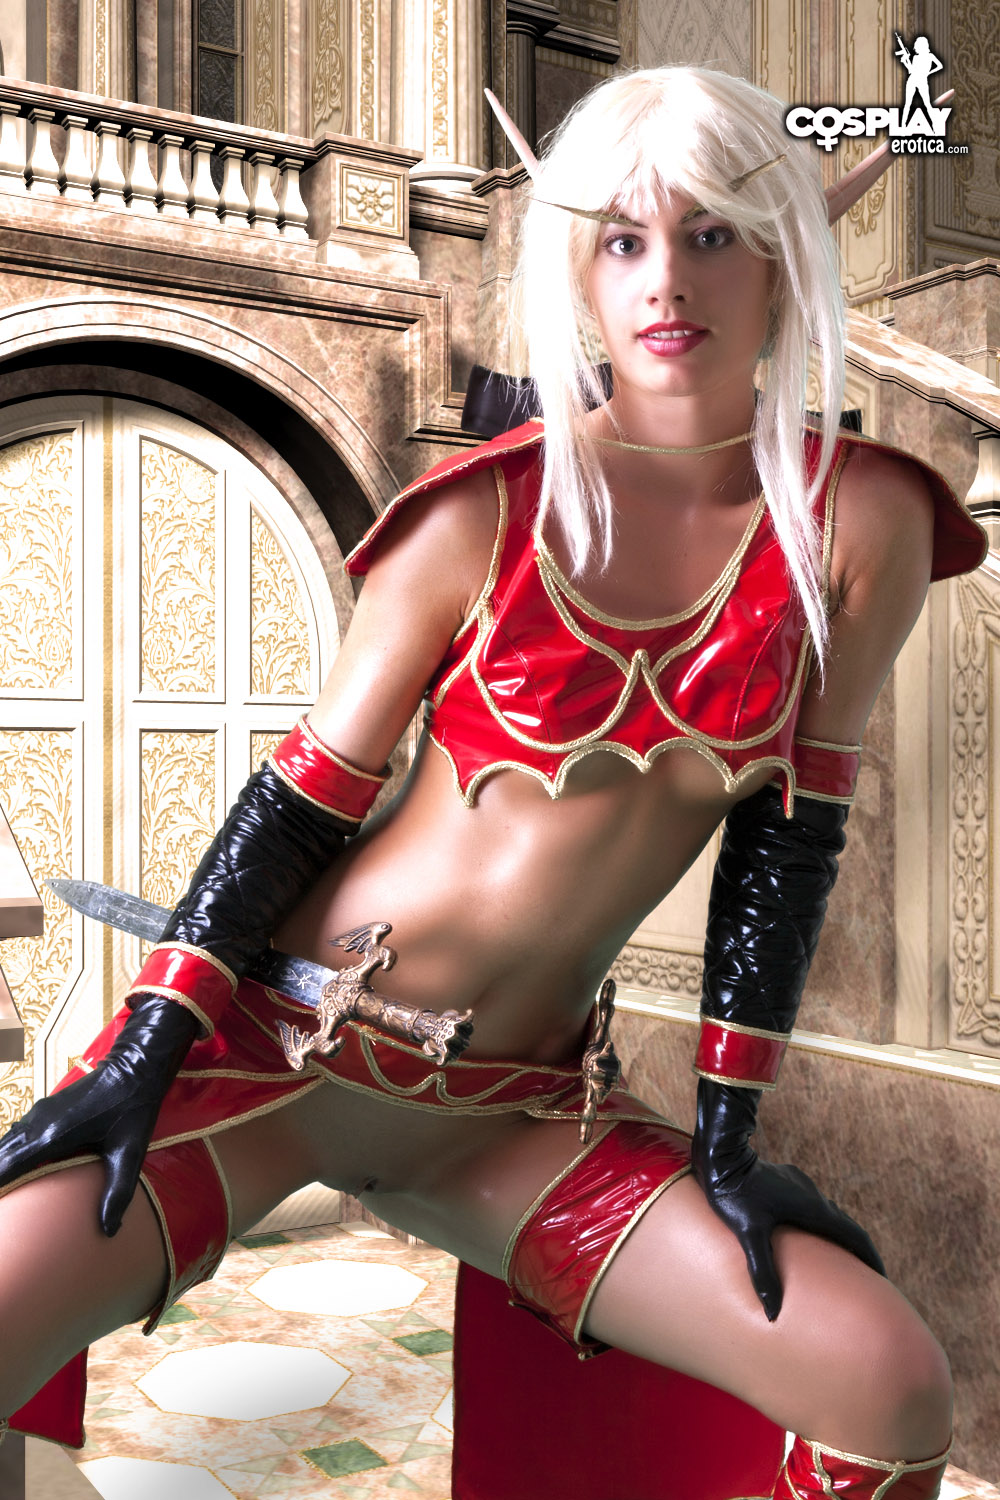 Female cosplay nudes